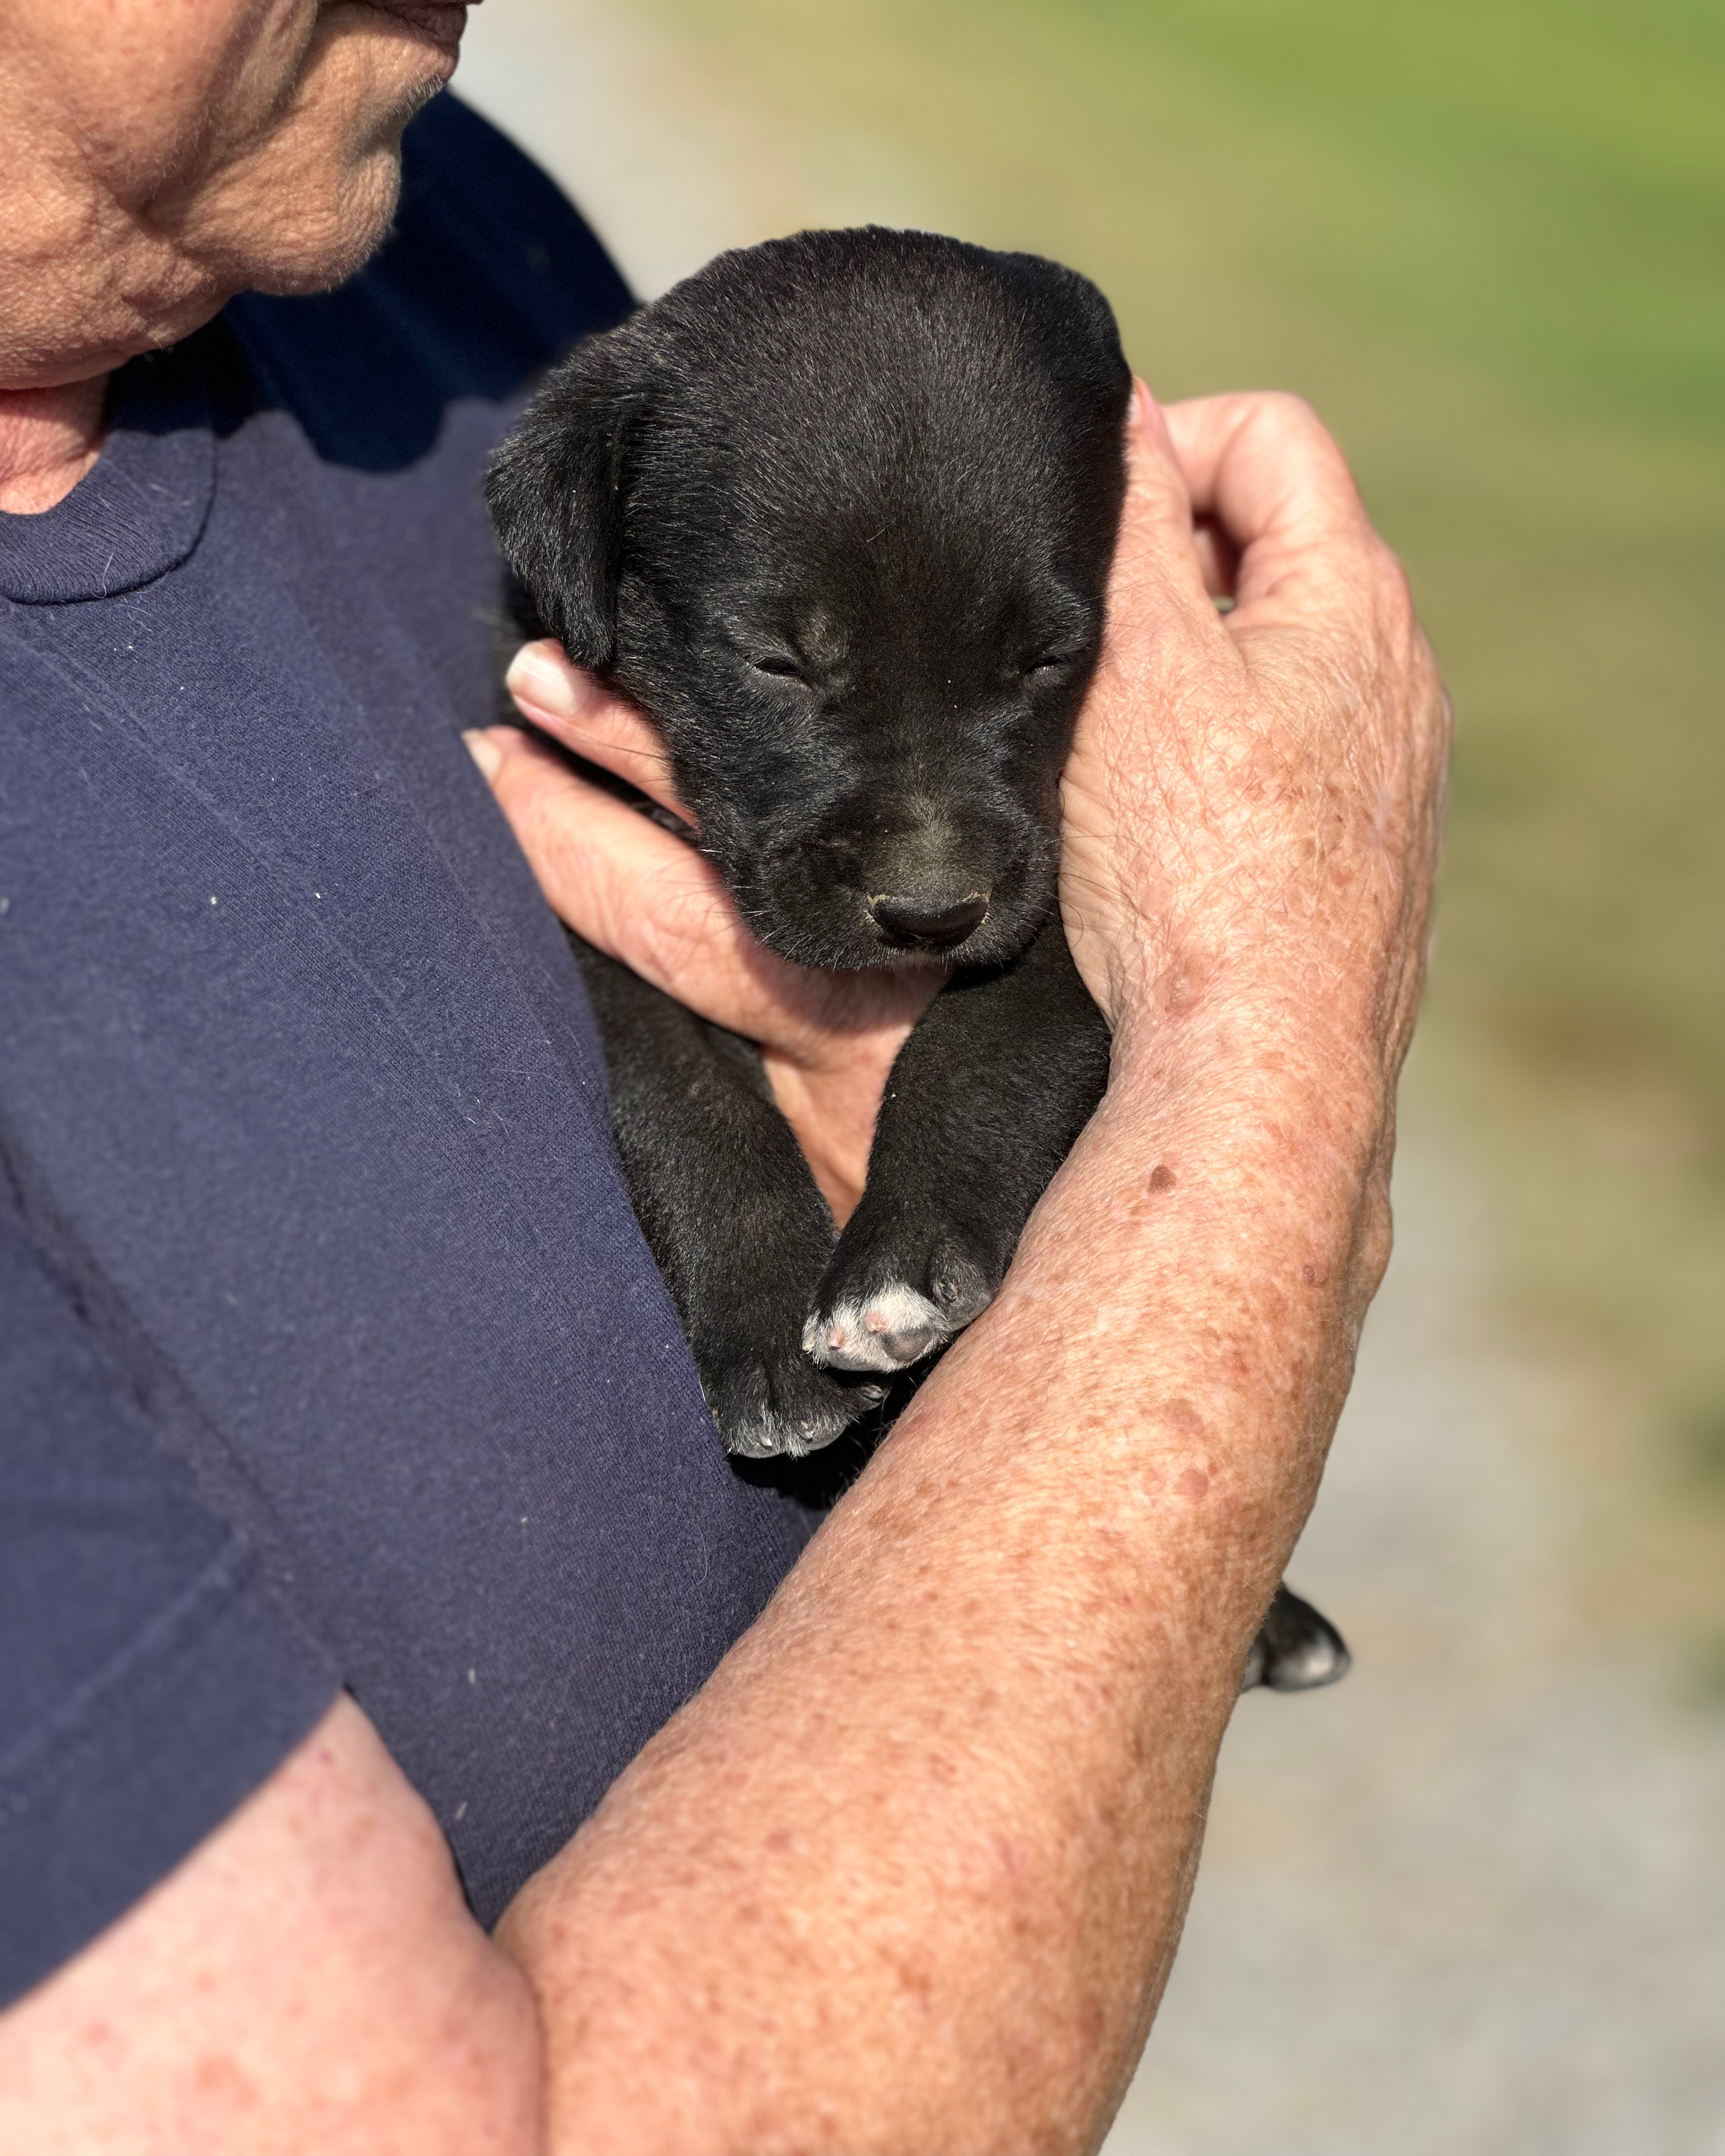 An ARC volunteer holds a small black puppy with white paws. Its eyes are closed.